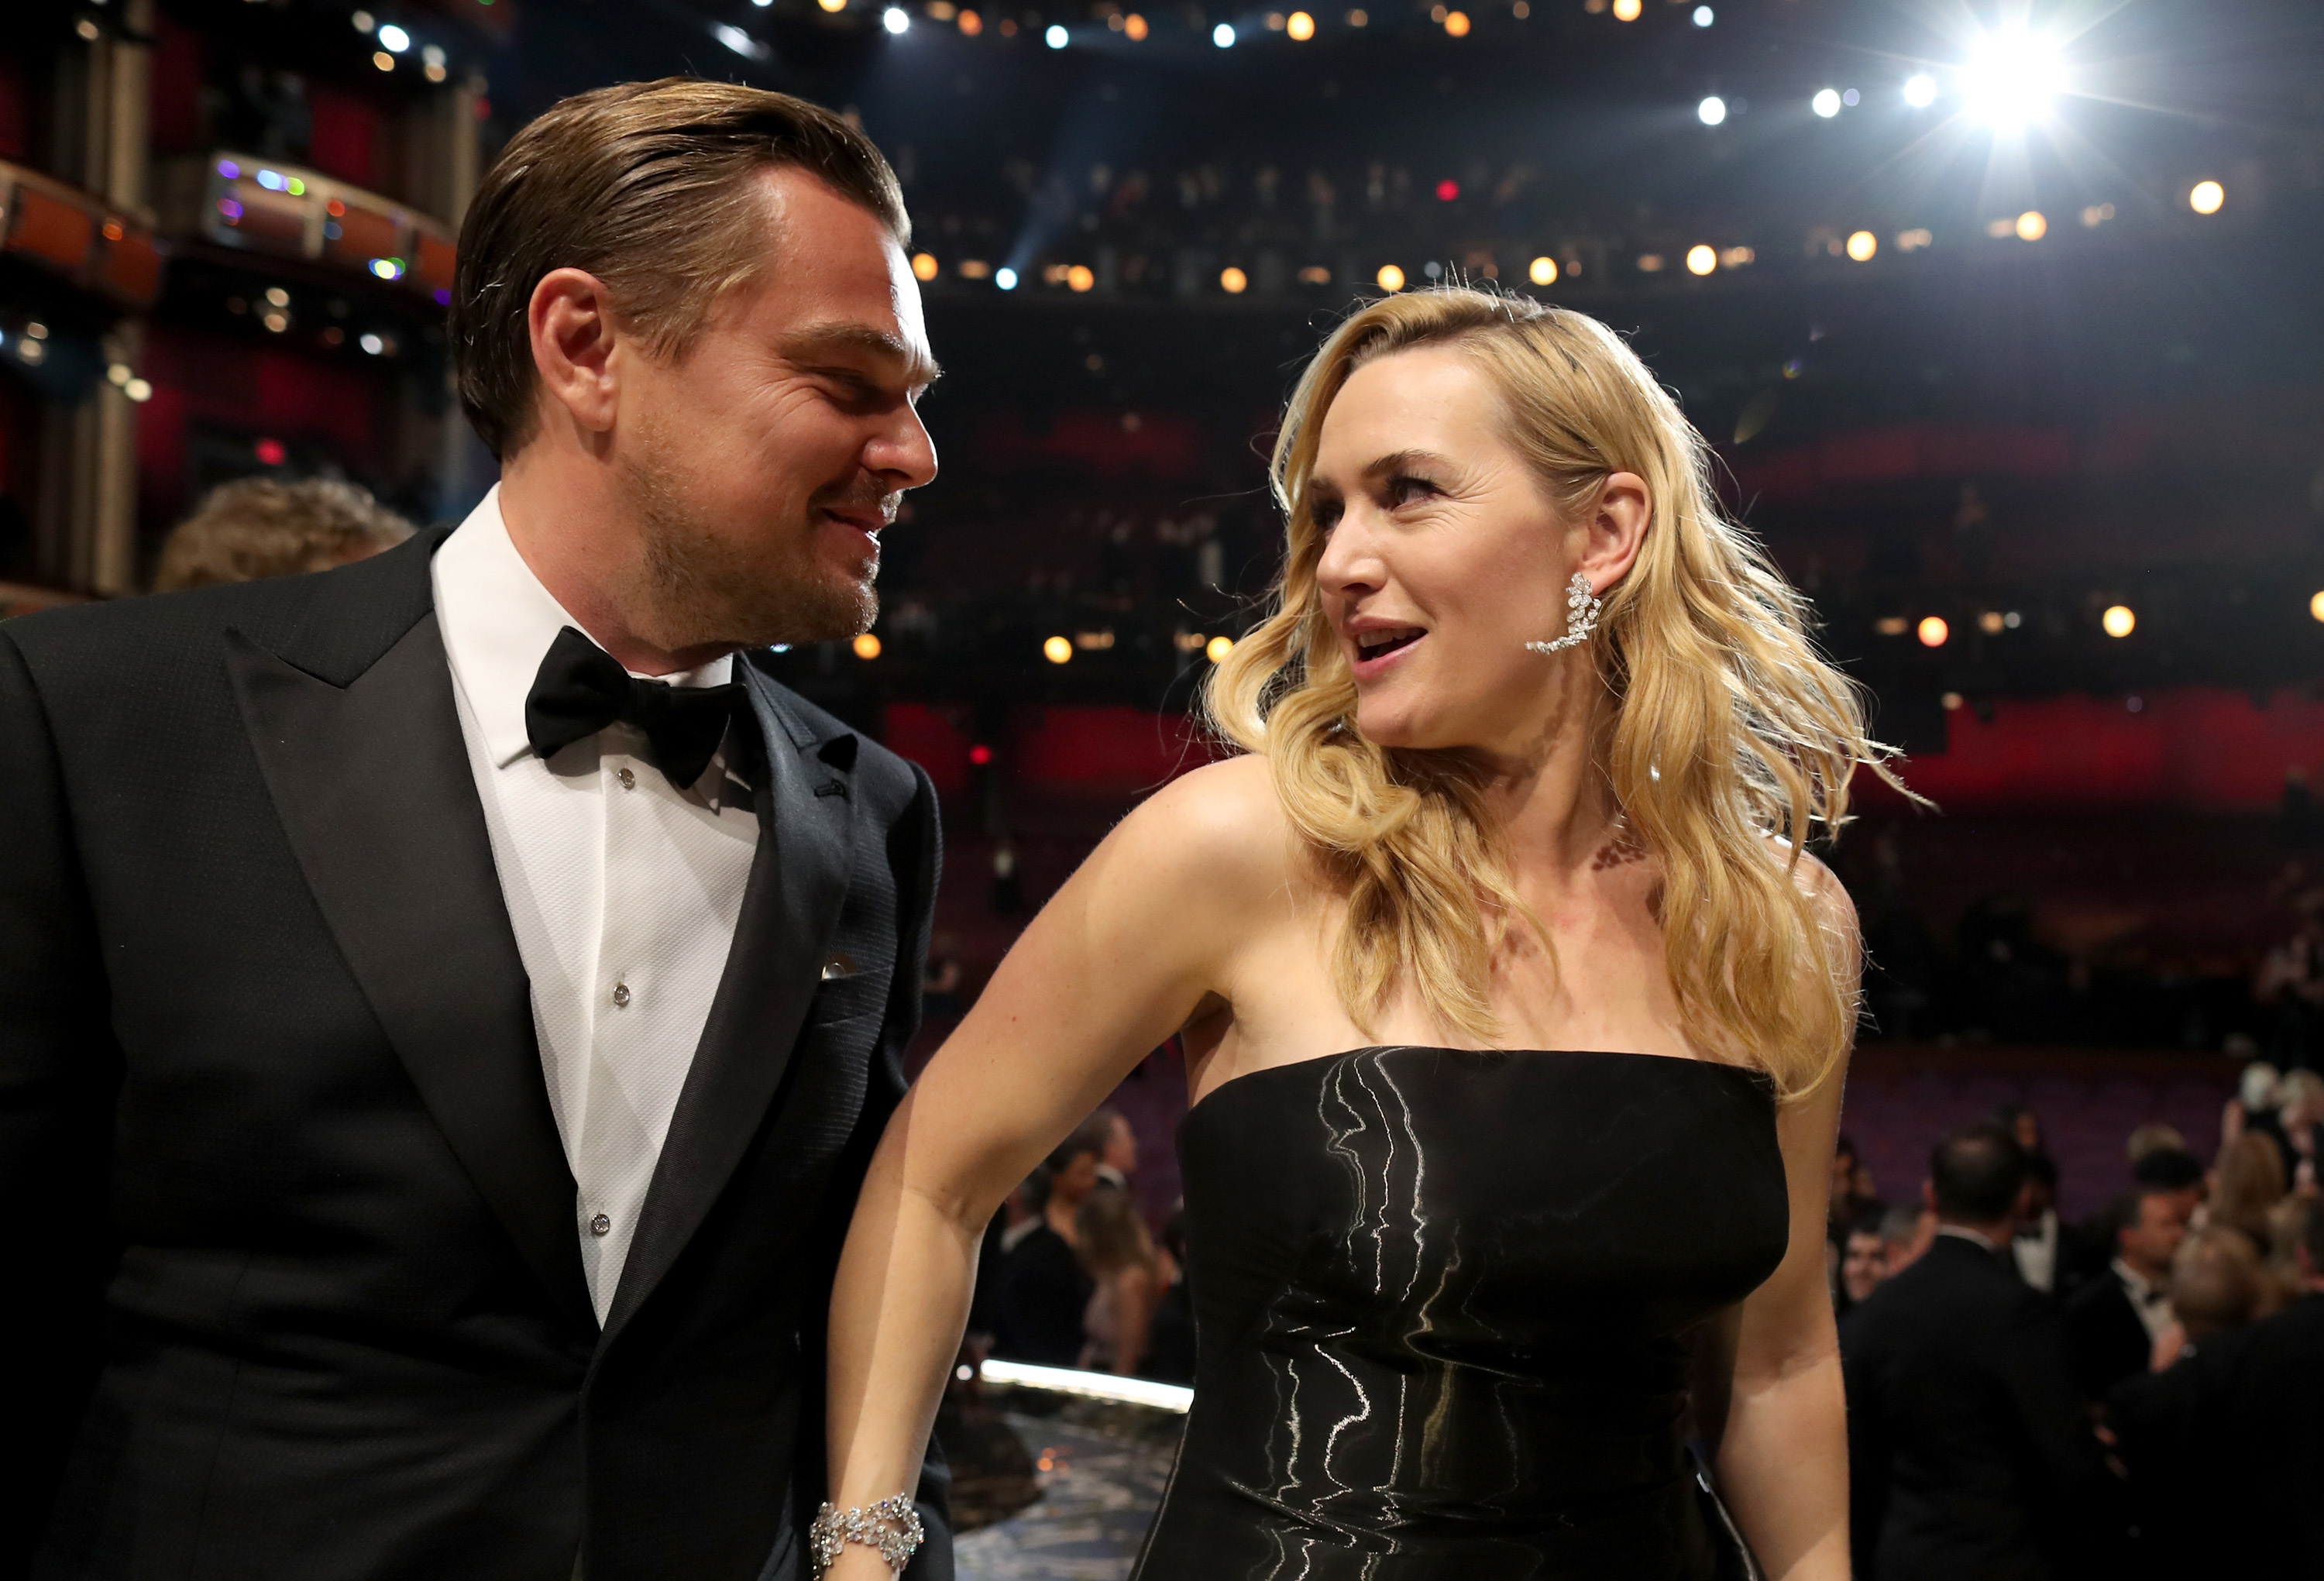 Leo and Kate smiling at each other at an event